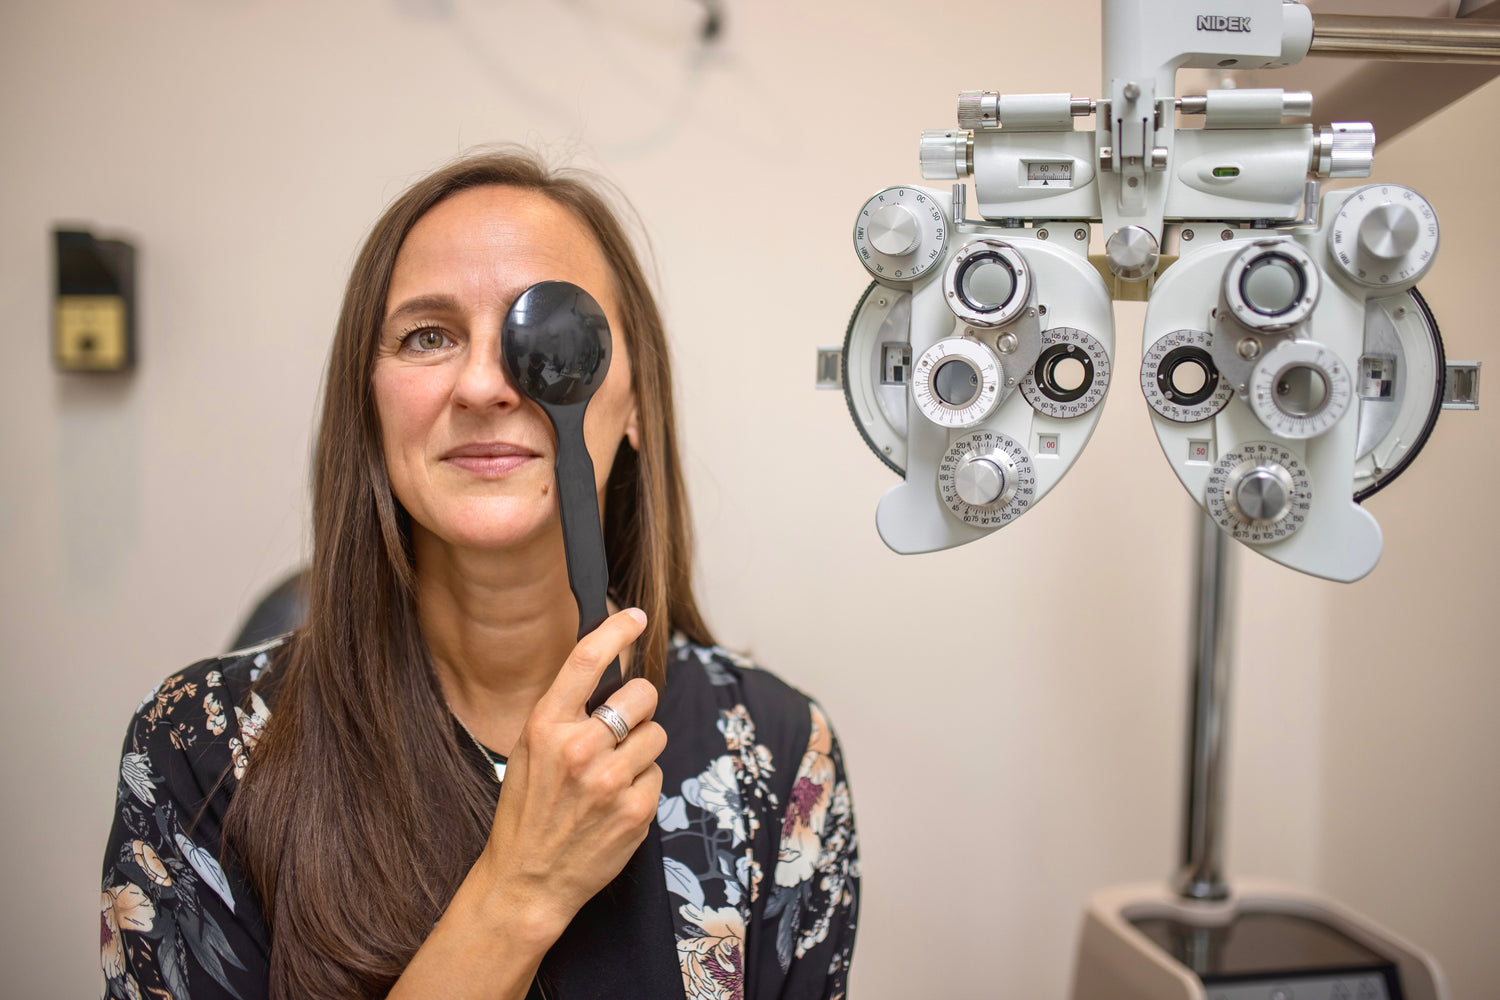 Long haired woman having eye exam, holding a small paddle over one eye to read chart. Next to her is optometry equipment.